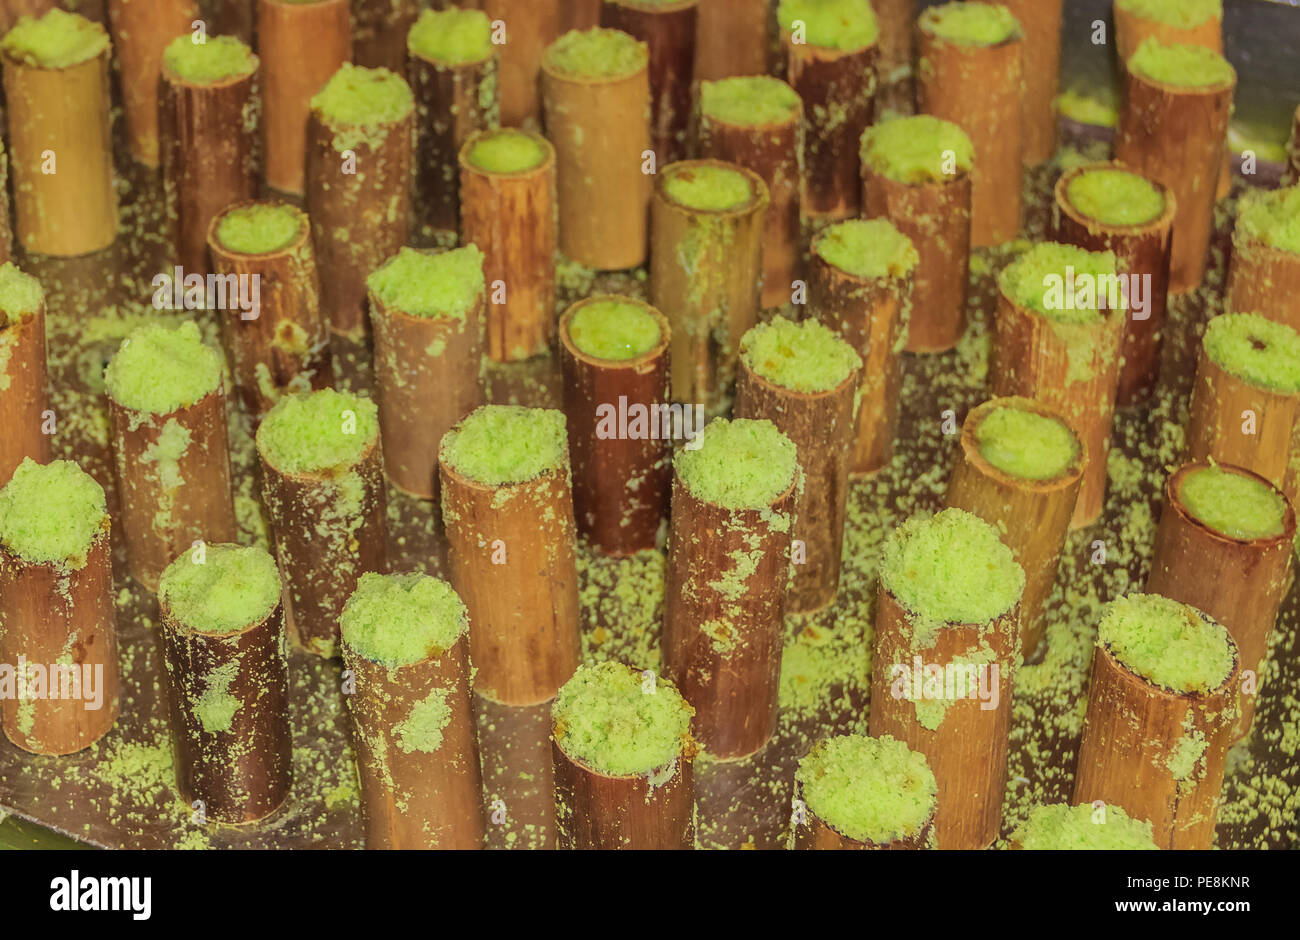 Putu bambu, traditional malaysian and indonesian sweet cooked with rice flour, pandan leafs, palm sugar, coconut and steamed in bamboo pipes at the  C Stock Photo